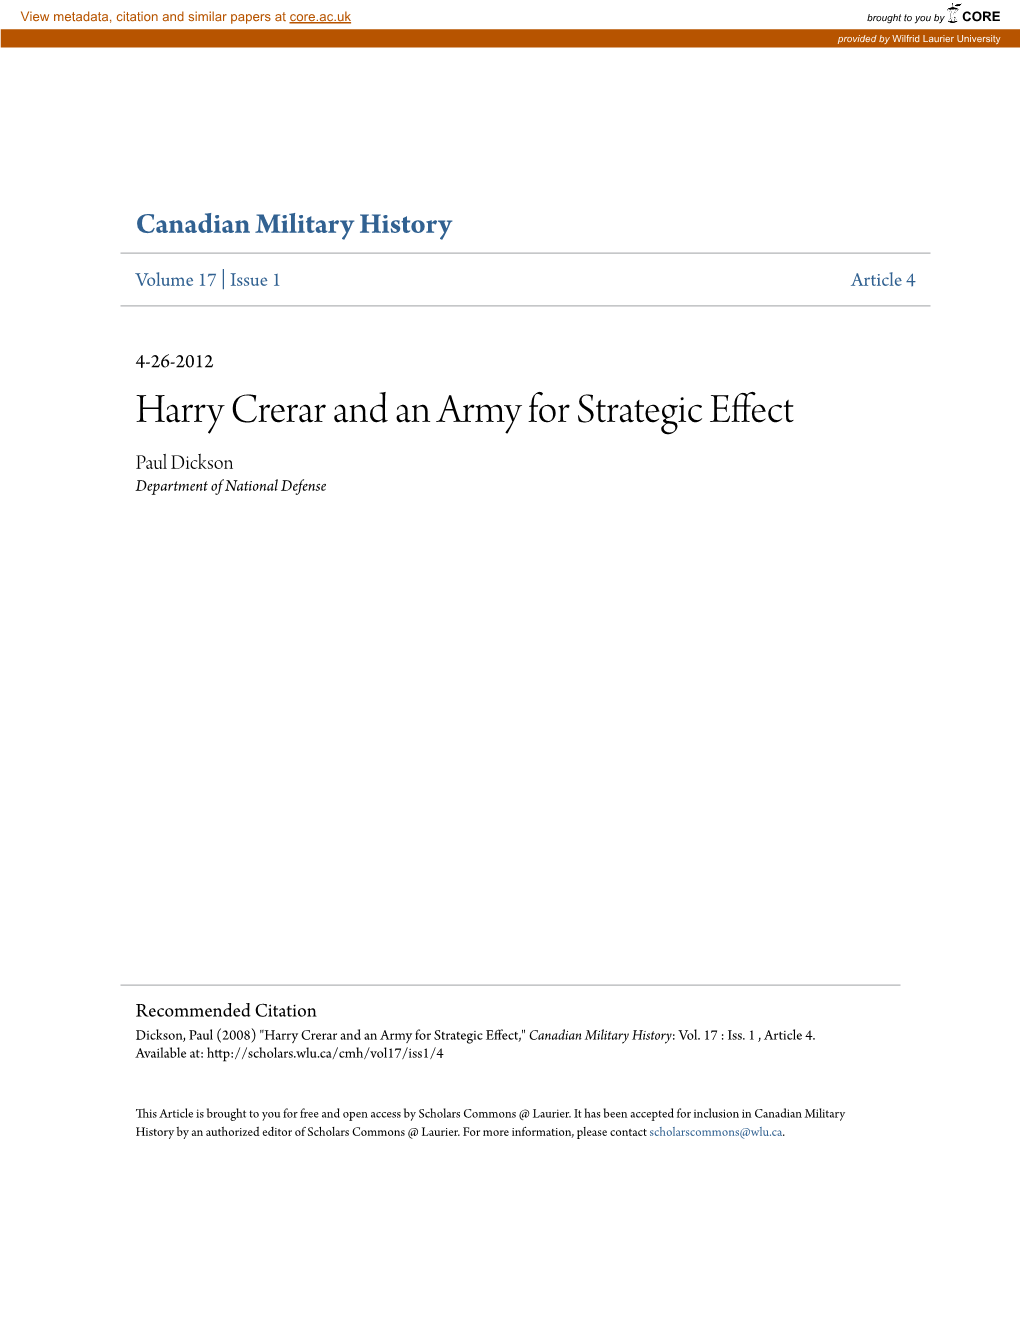 Harry Crerar and an Army for Strategic Effect Paul Dickson Department of National Defense